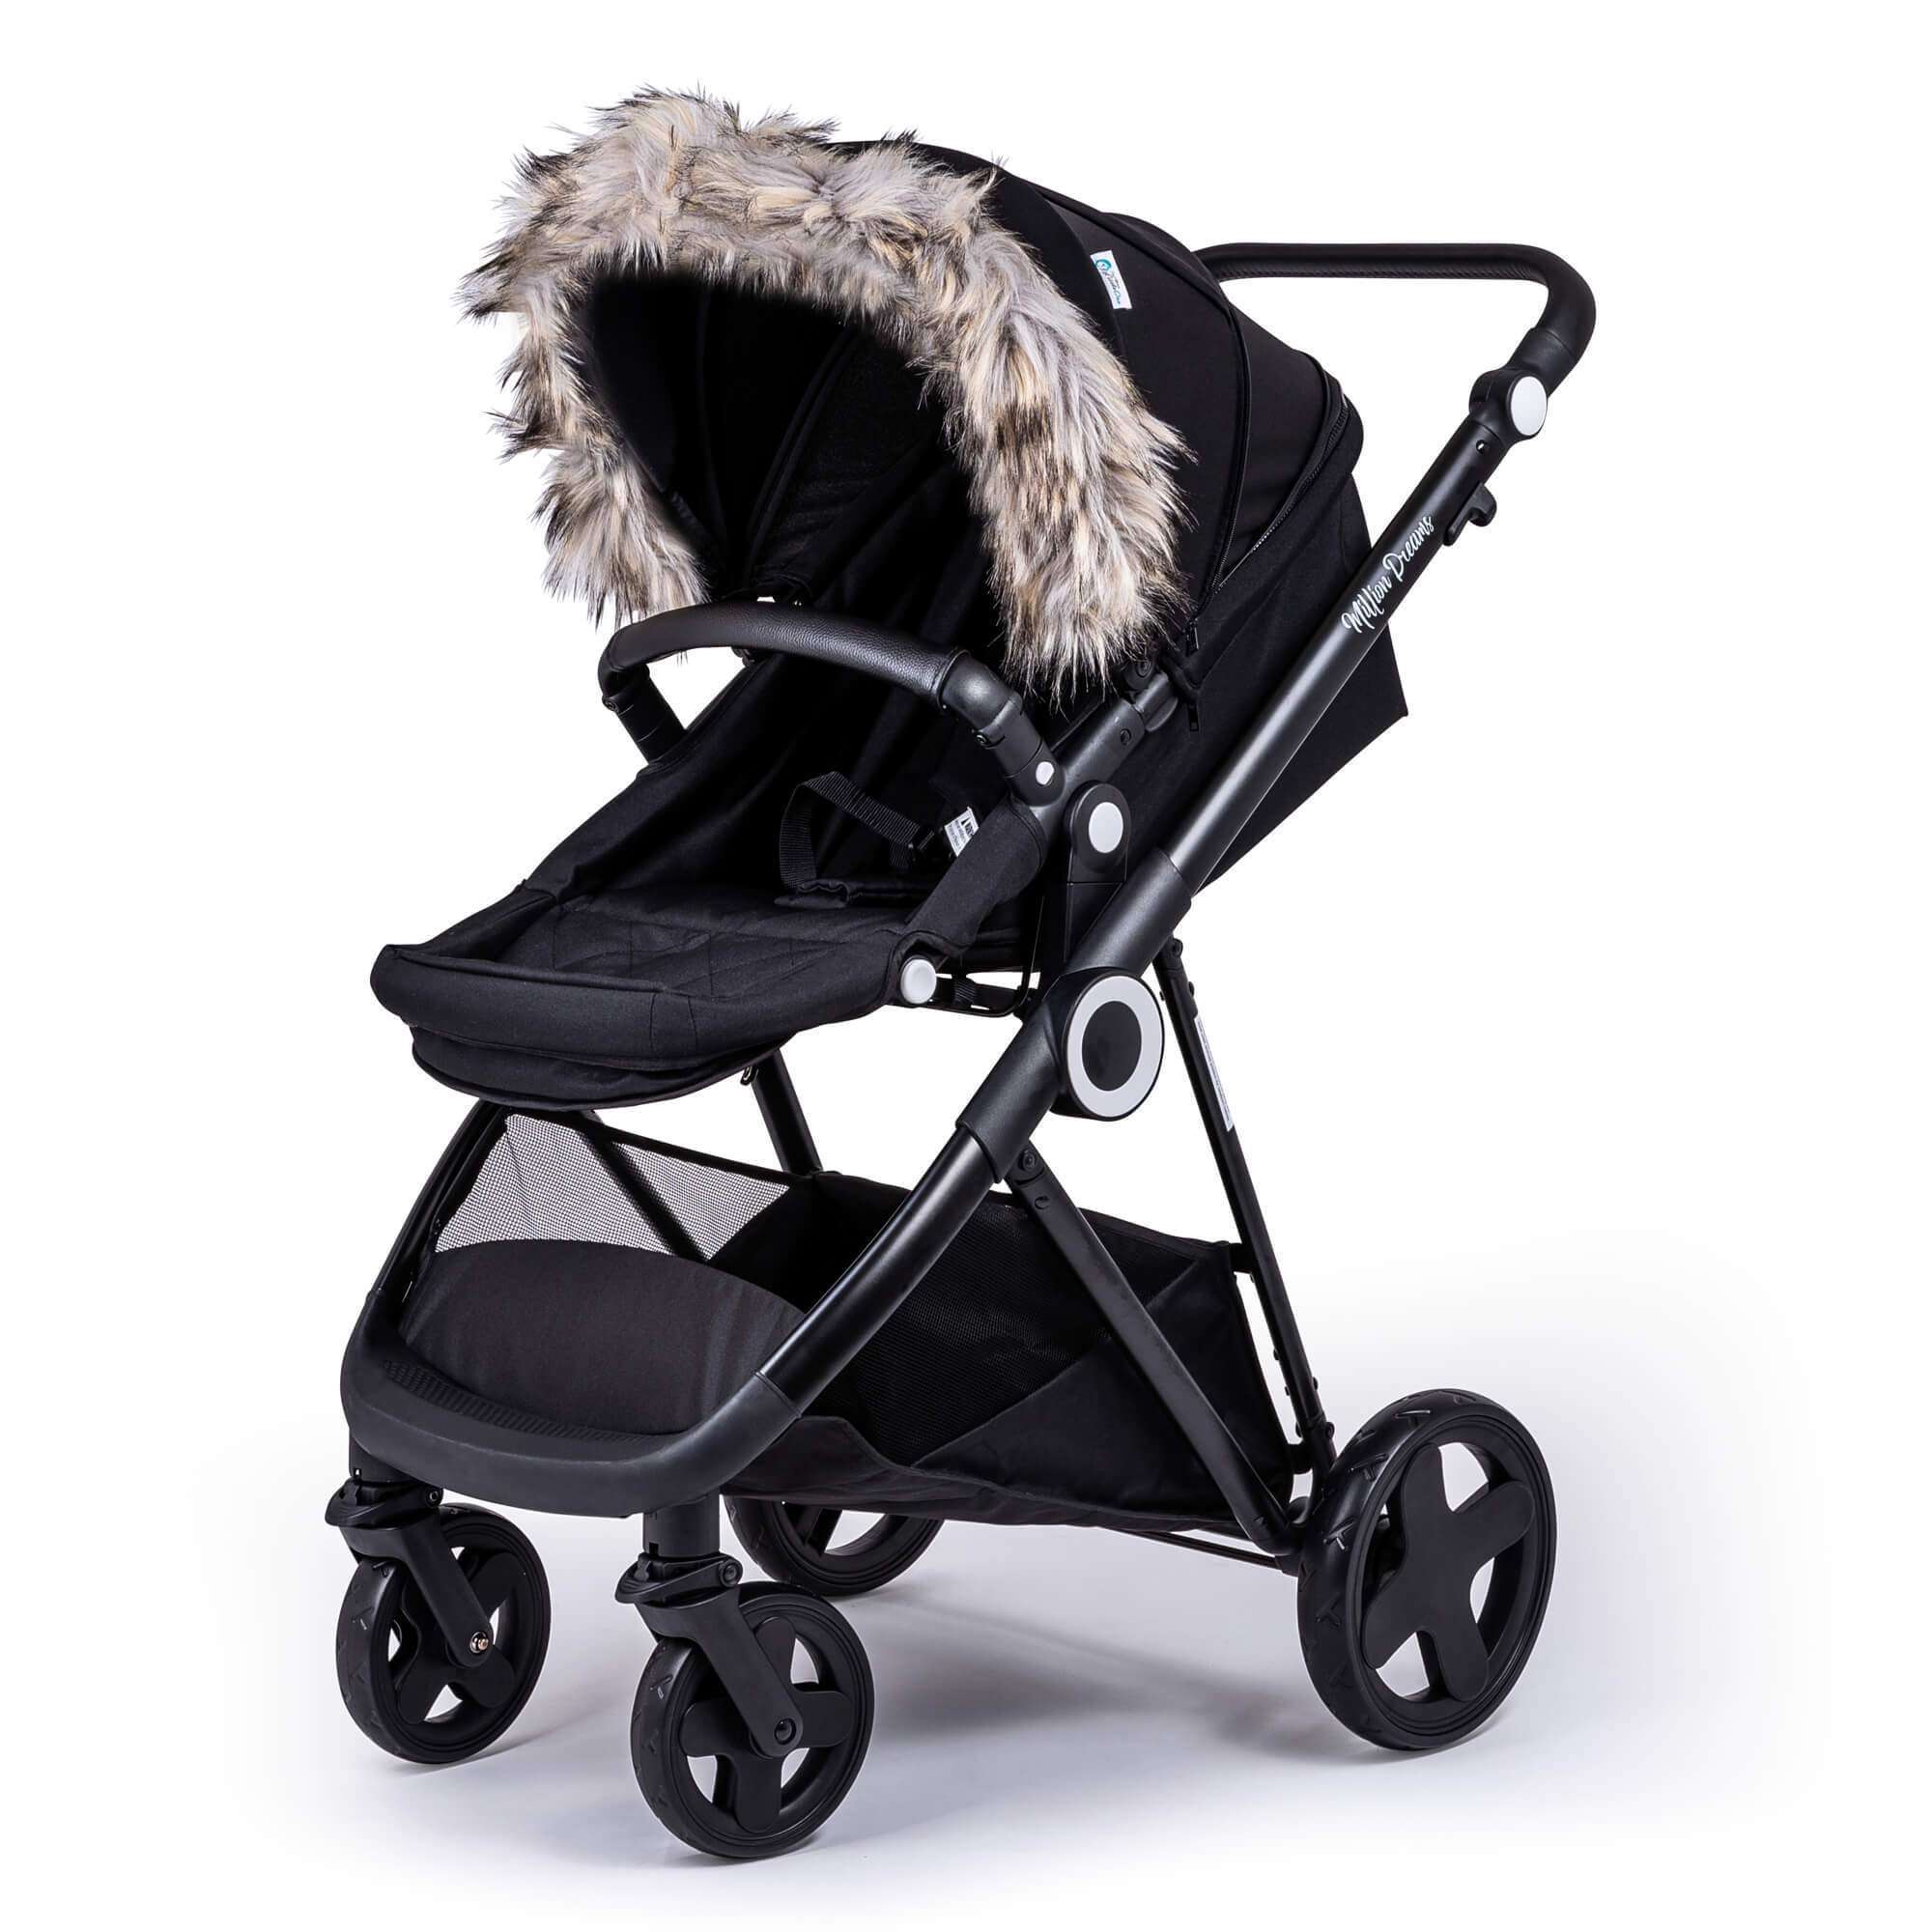 Pram Fur Hood Trim Attachment for Pushchair Compatible with Gesslein - Light Grey / Fits All Models | For Your Little One